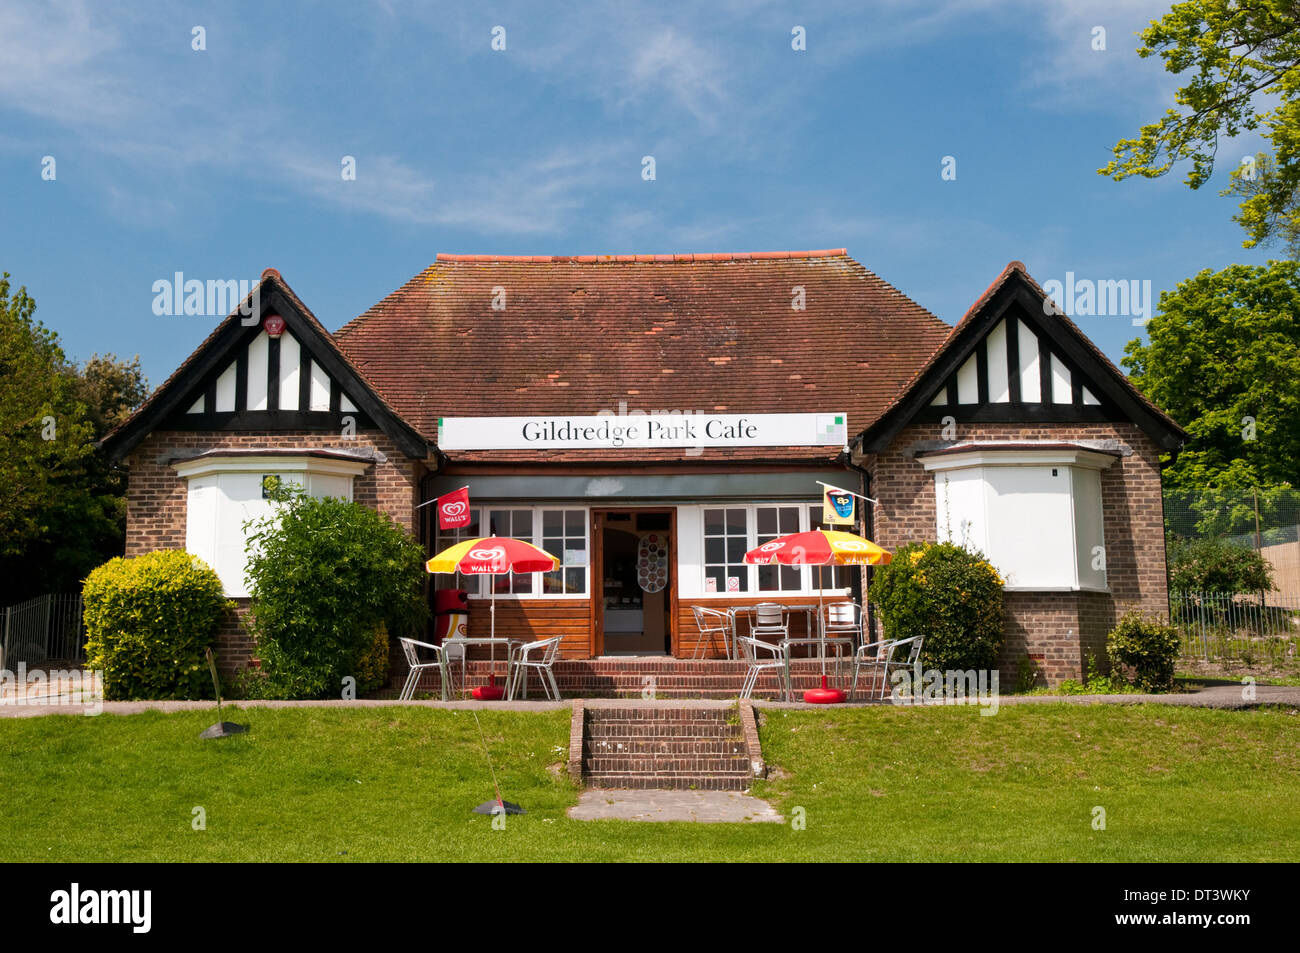 Gildredge Park Cafe, an old-fashioned refreshment kiosk in Eastbourne, UK on a sunny day Stock Photo